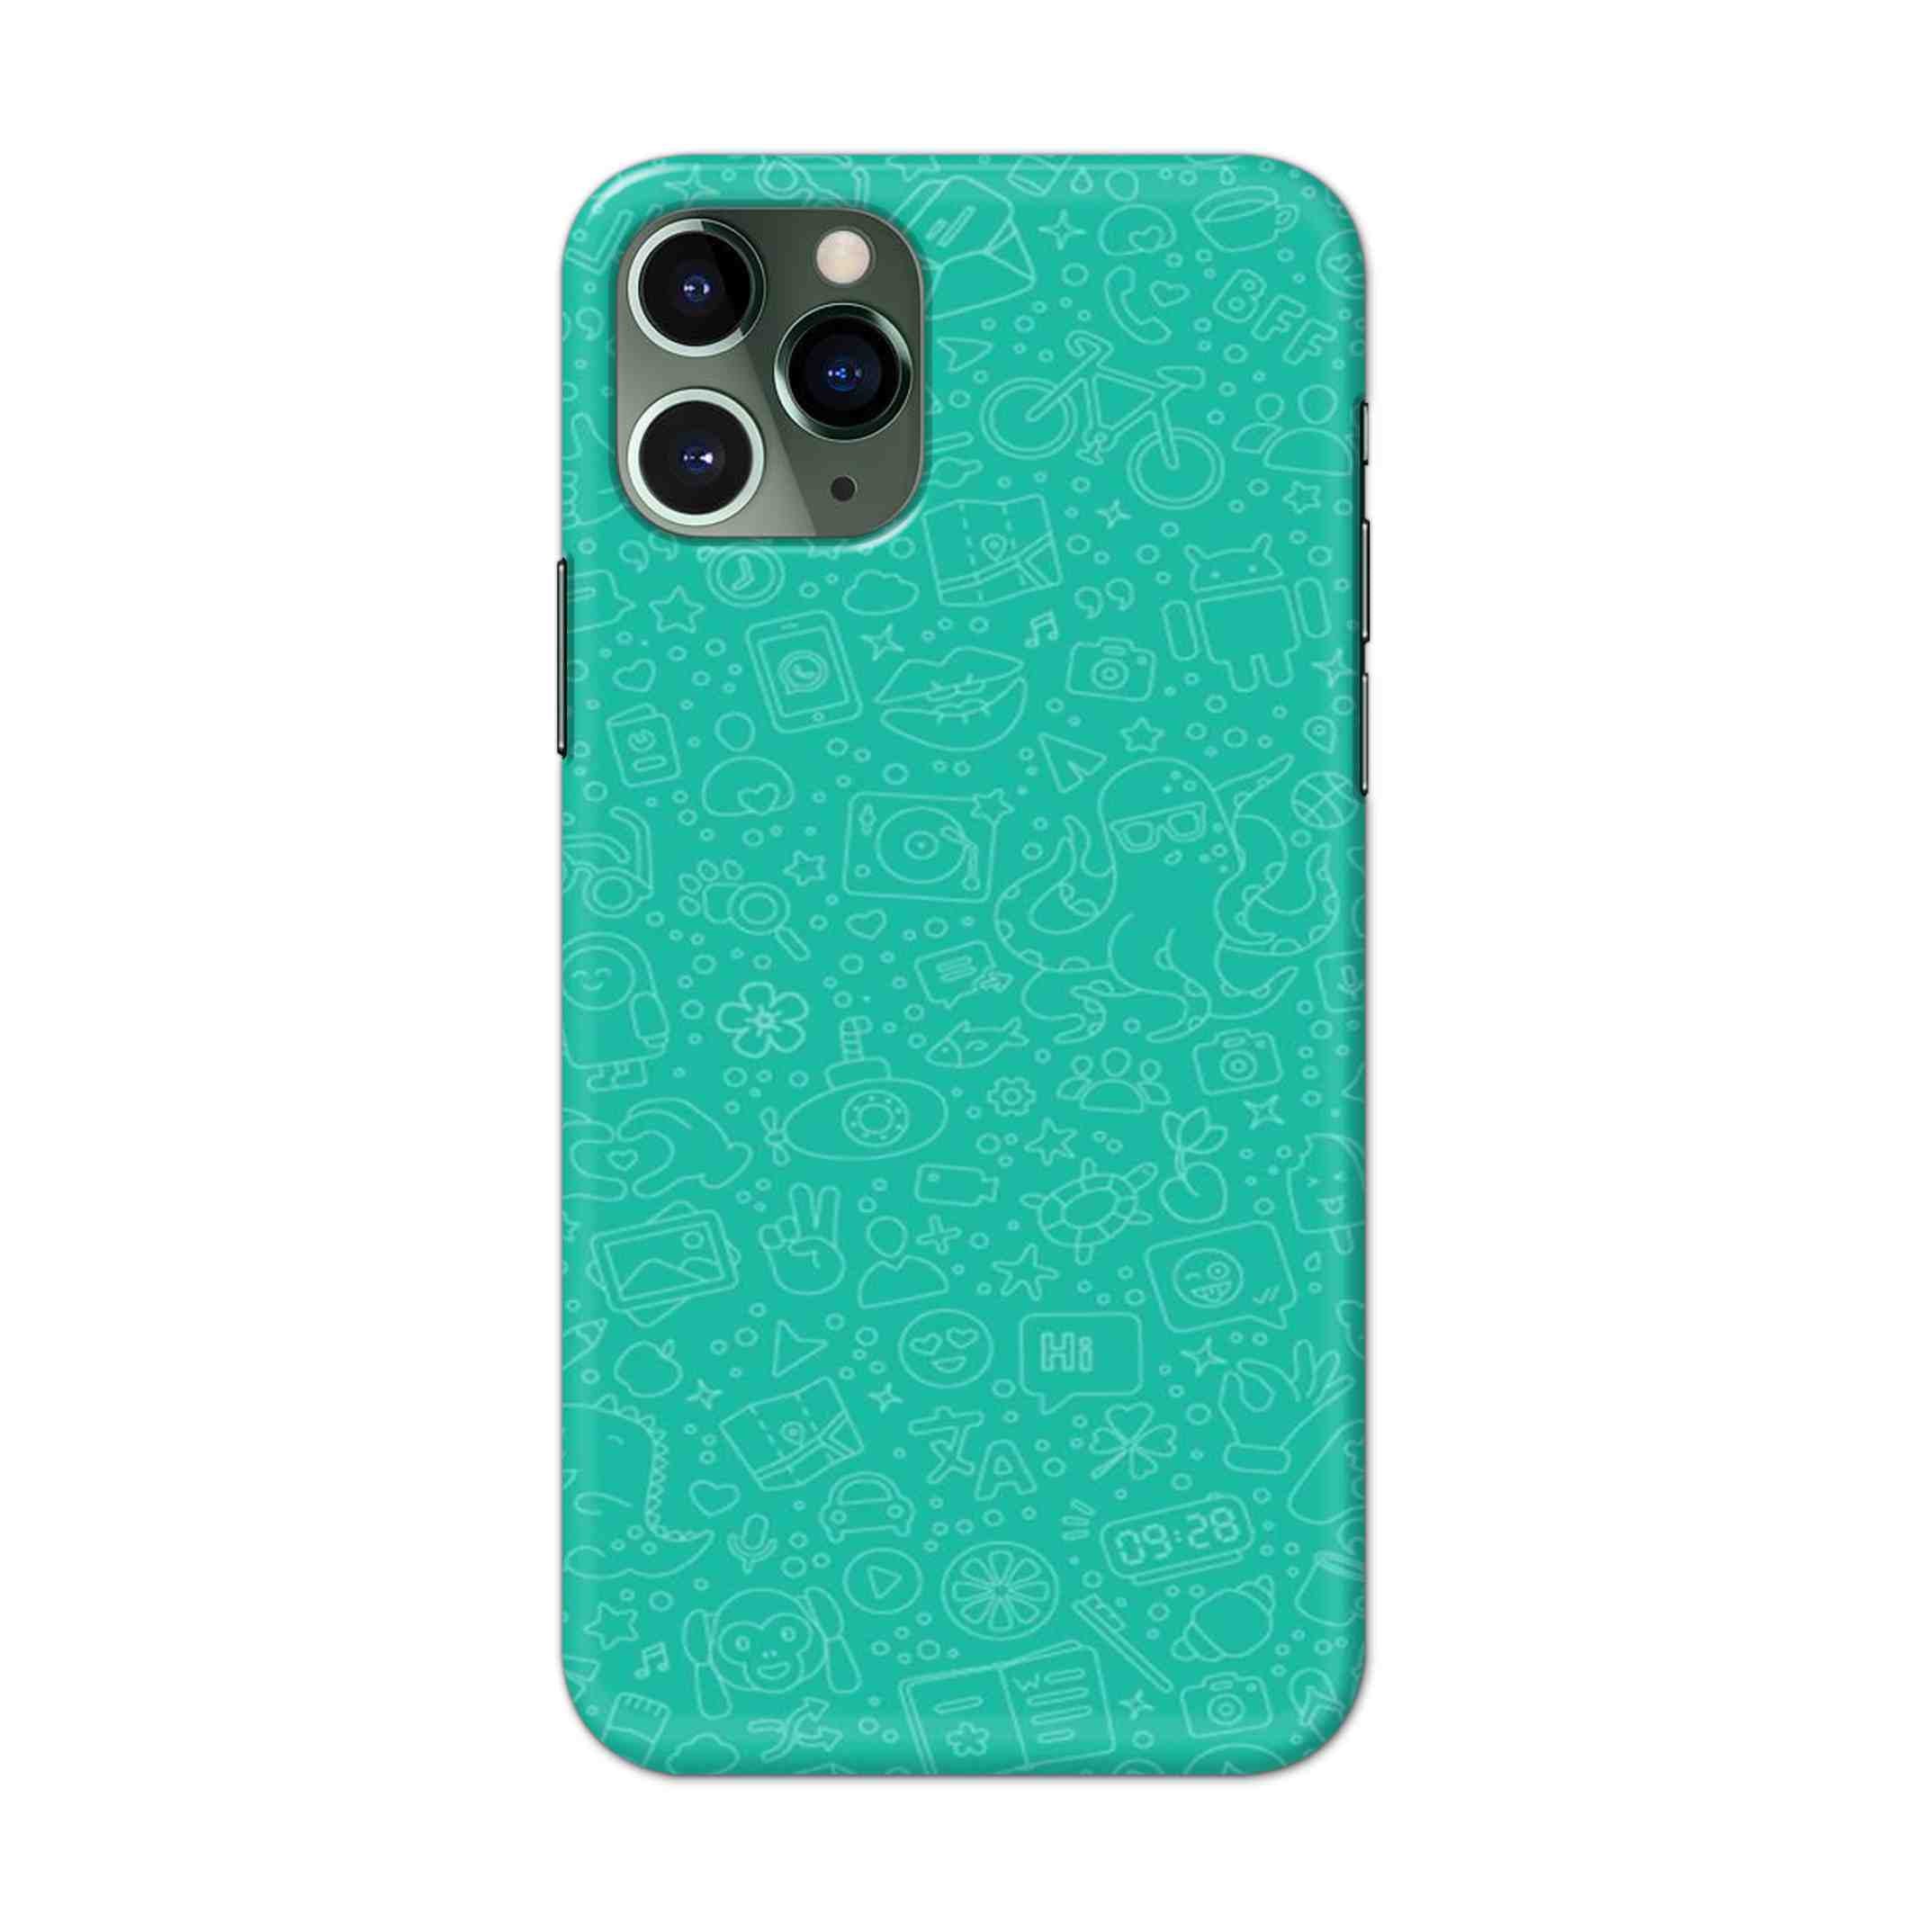 Buy Whatsapp Hard Back Mobile Phone Case/Cover For iPhone 11 Pro Online